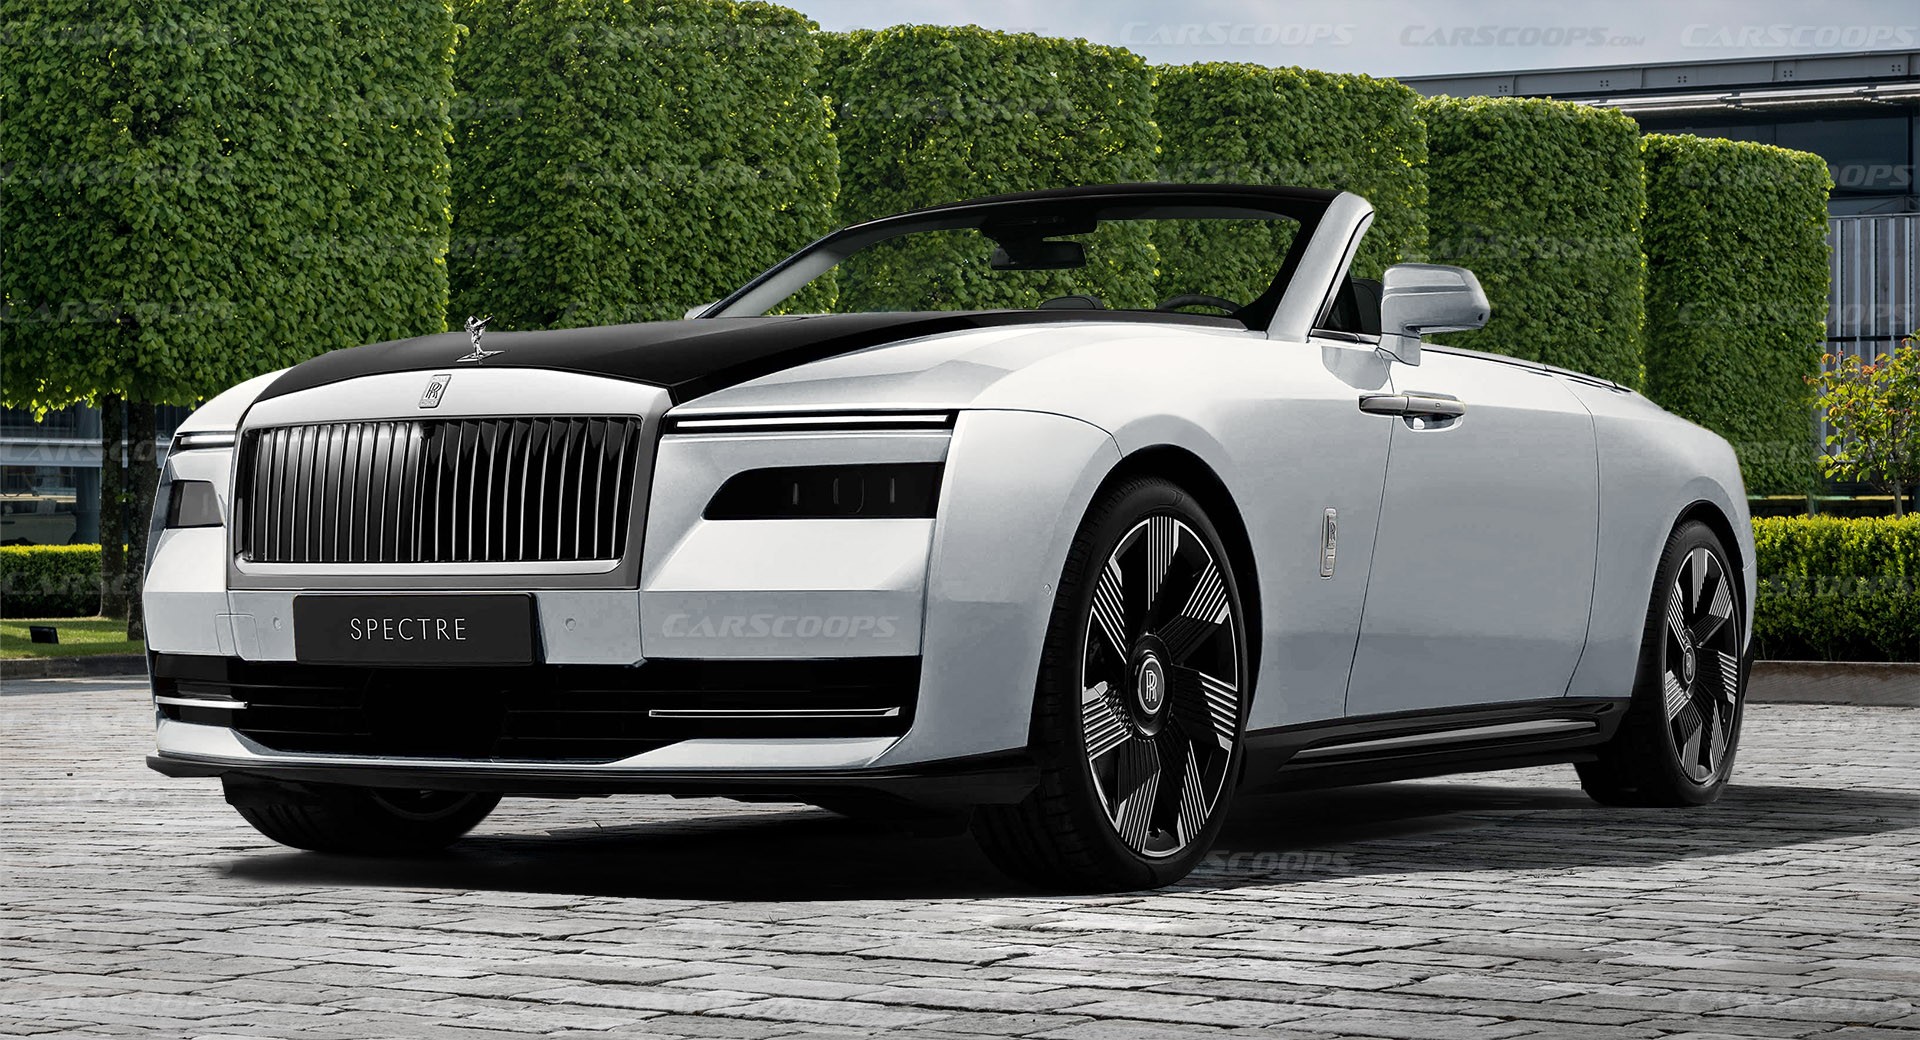 A 2025 RollsRoyce Spectre Convertible Should Only Be A Matter Of Time